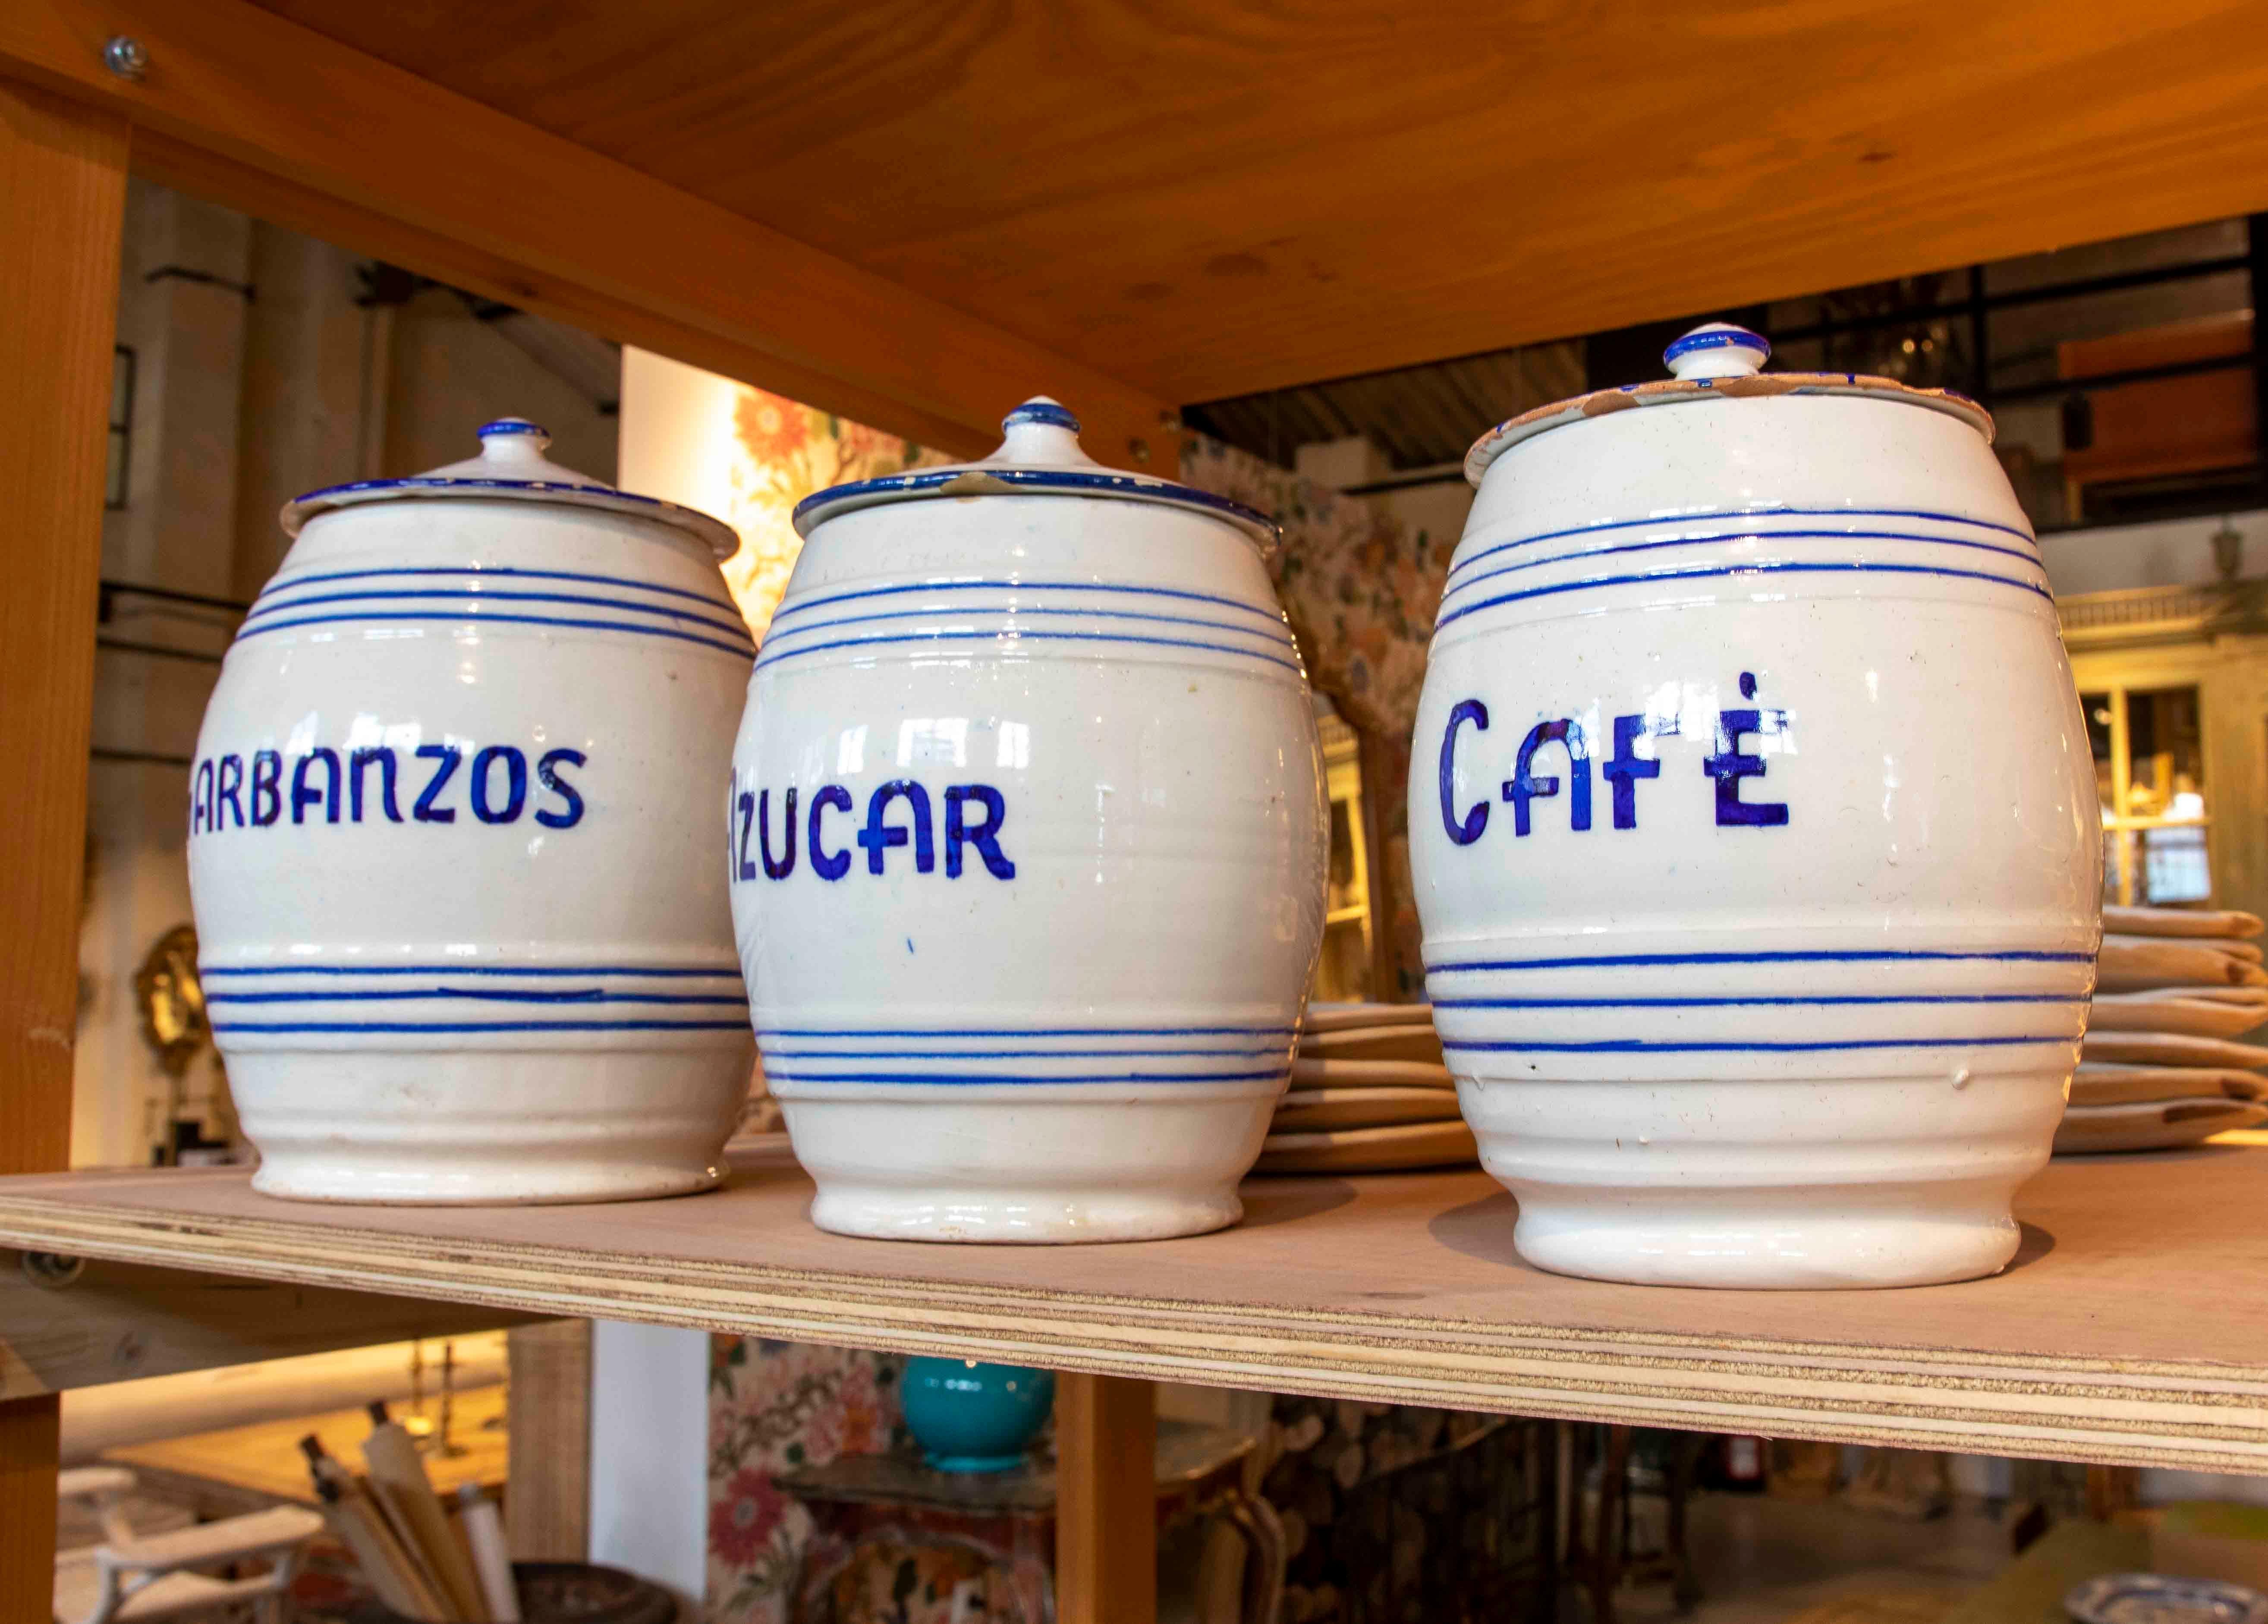 Set of Ceramic Jars with Lids for Storing Vegetables, Sugar and Coffee.